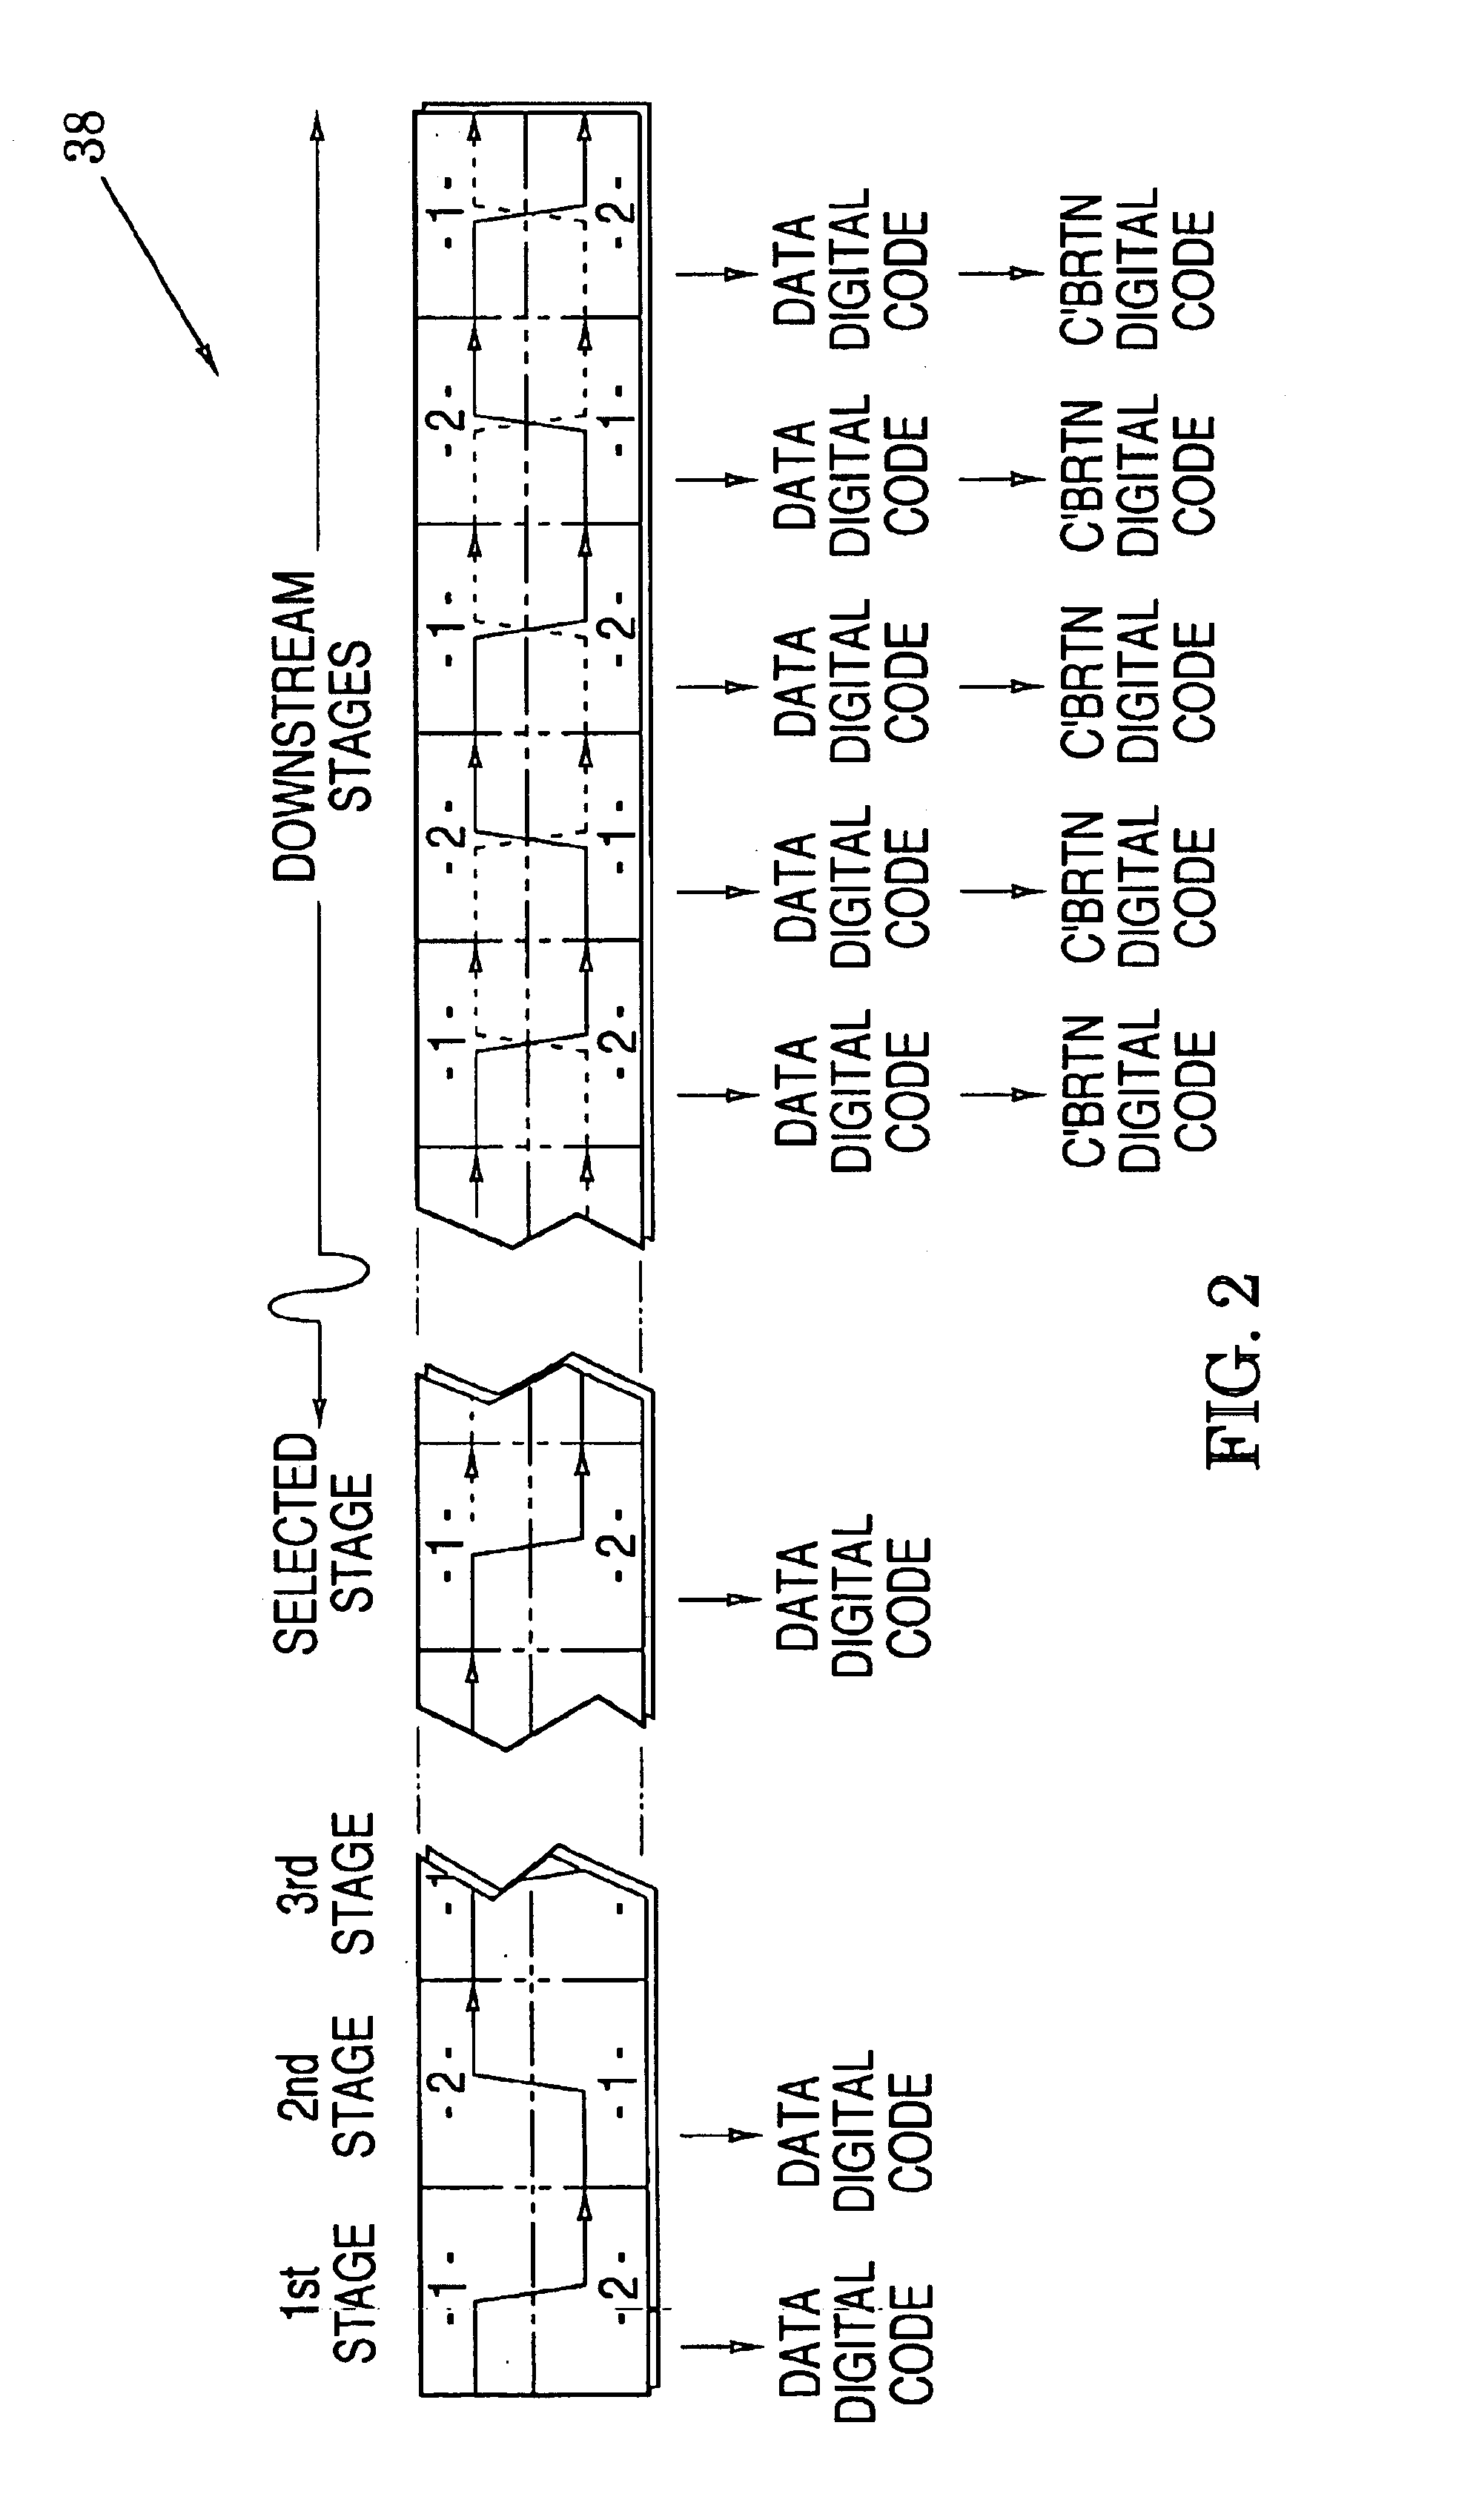 Analog-to-digital converter methods and structures for interleavably processing data signals and calibration signals